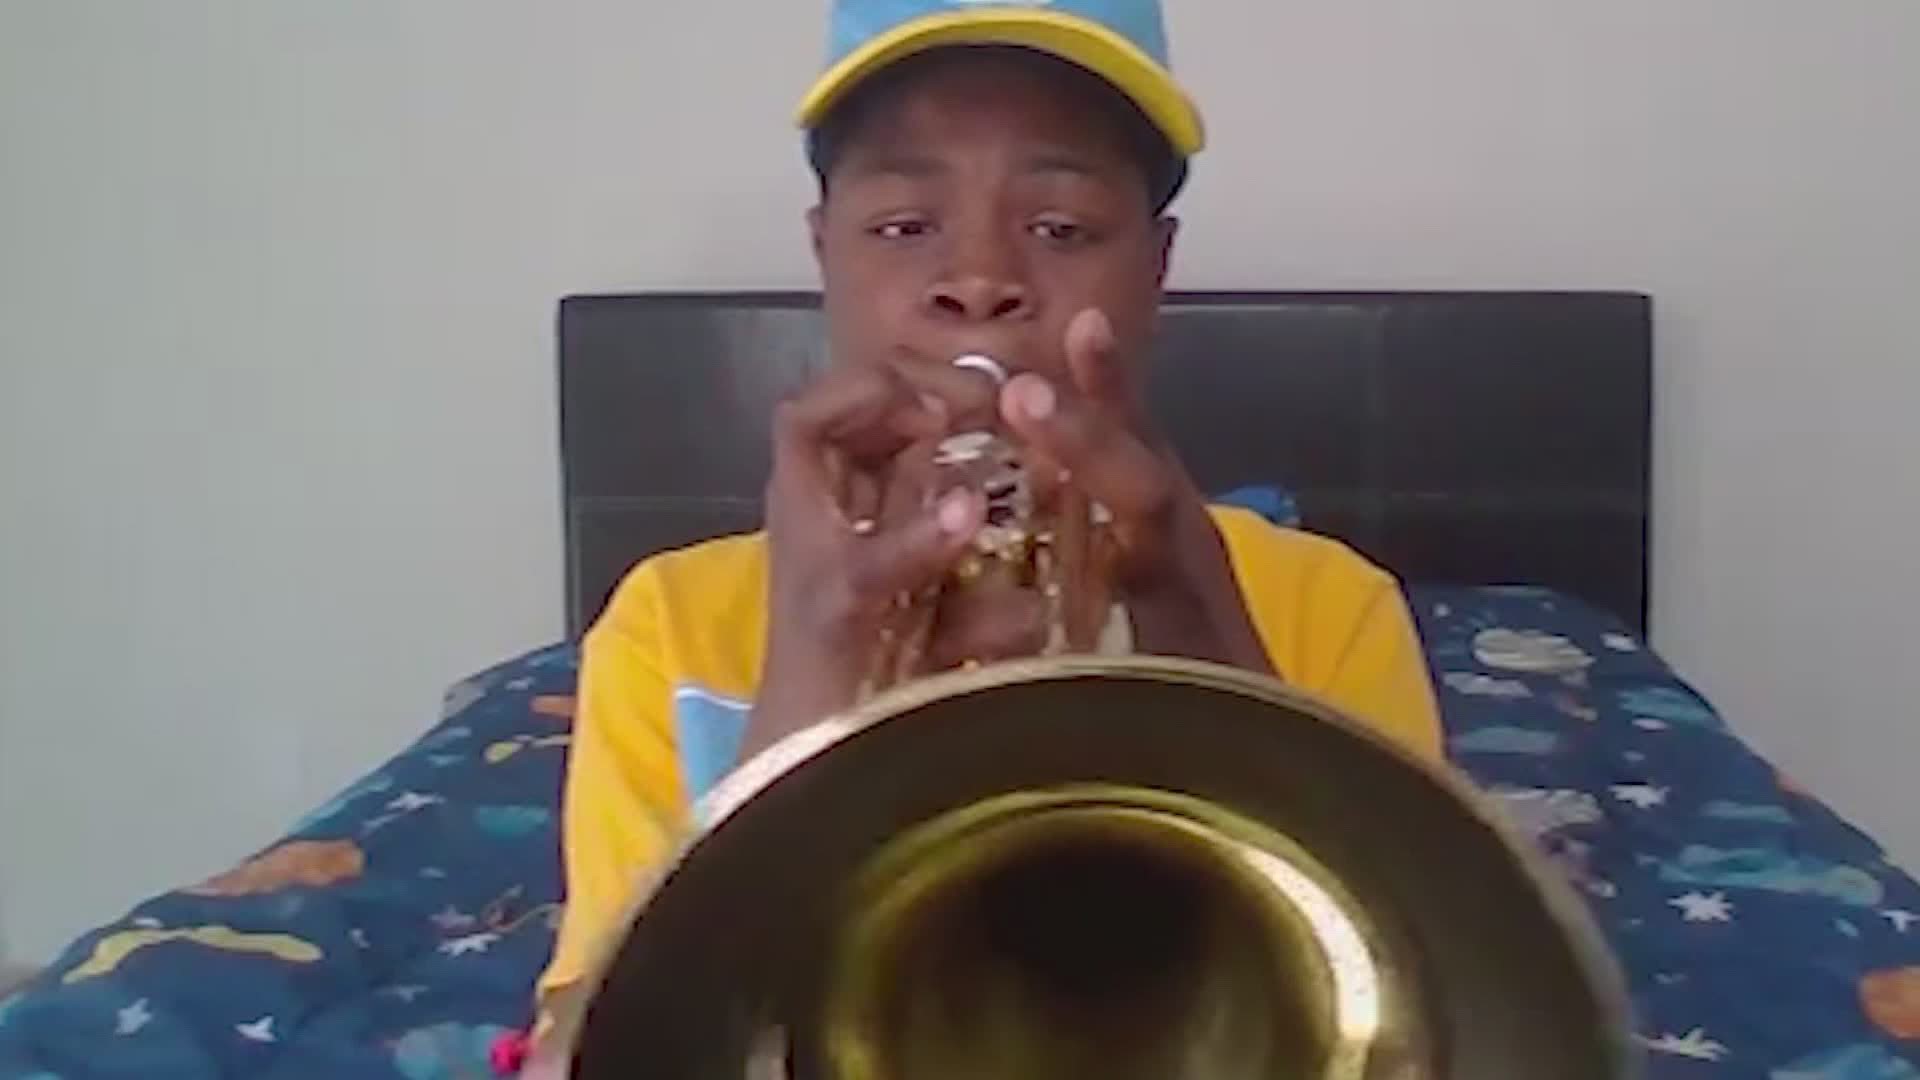 A fifth grader is now an honorary band member at Southern University and it all started with a homemade video and a generous district employee.